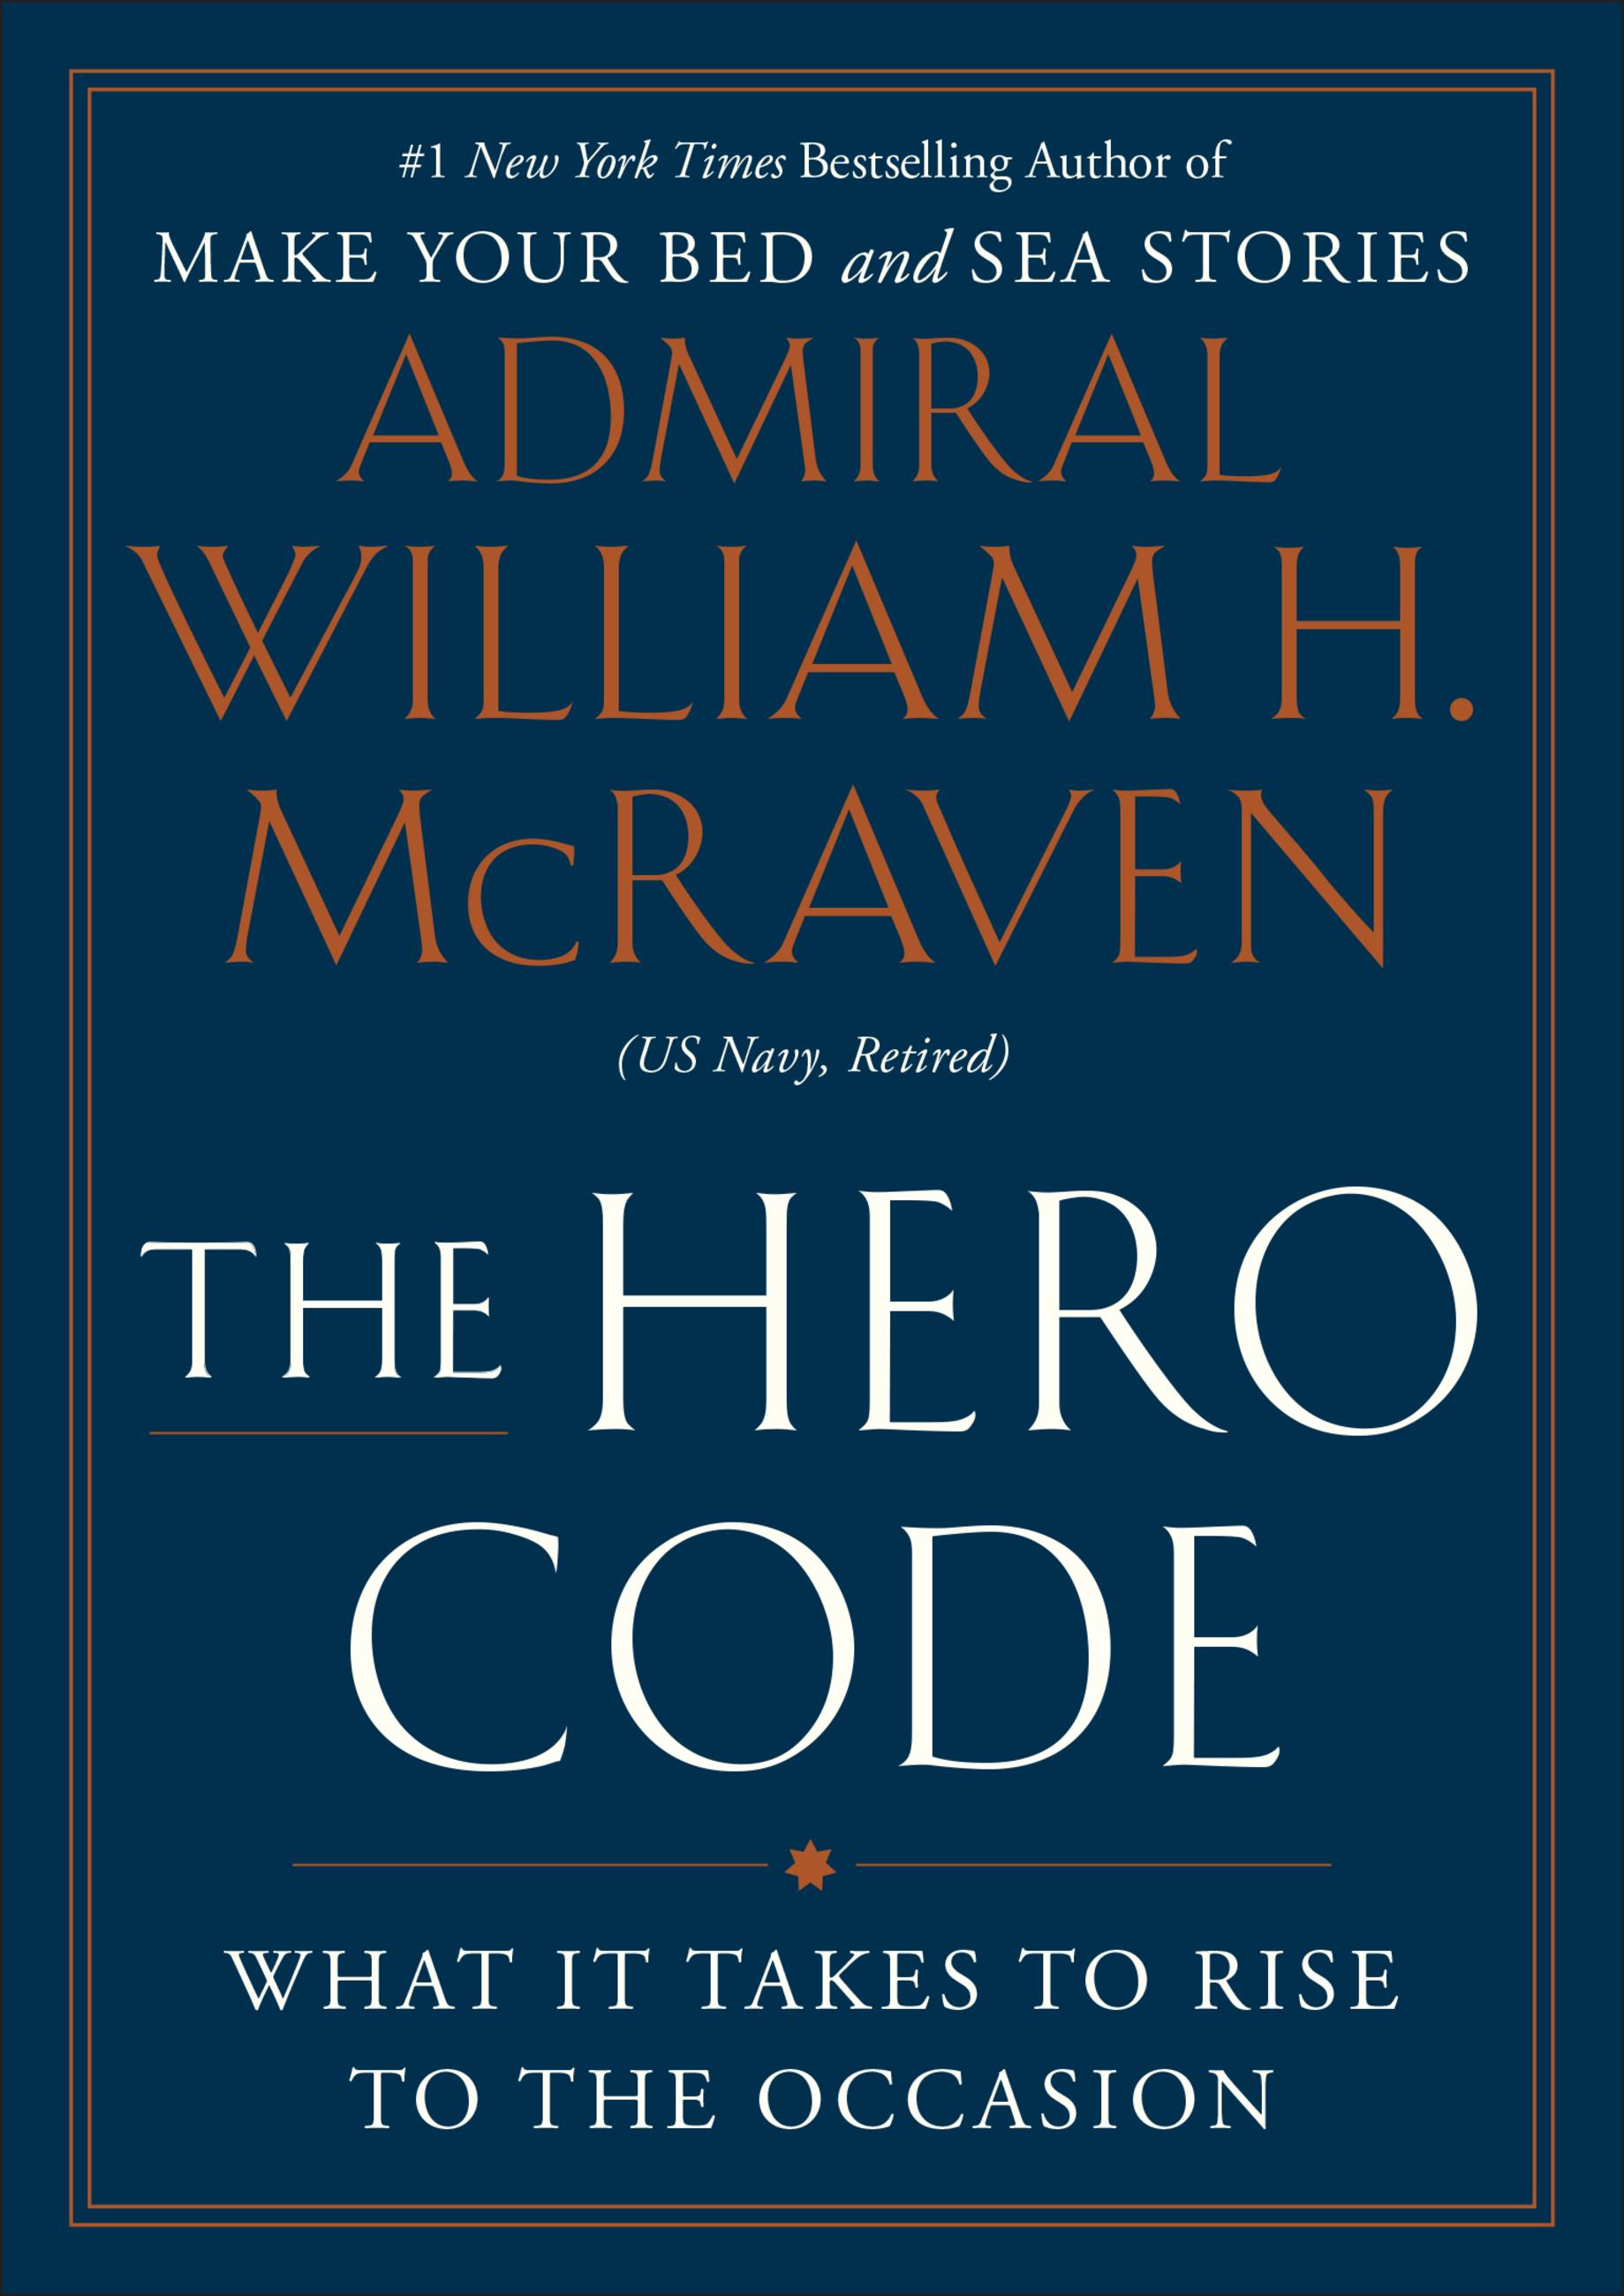 Stream The Hero Code by Admiral William H. McRaven Read by Author